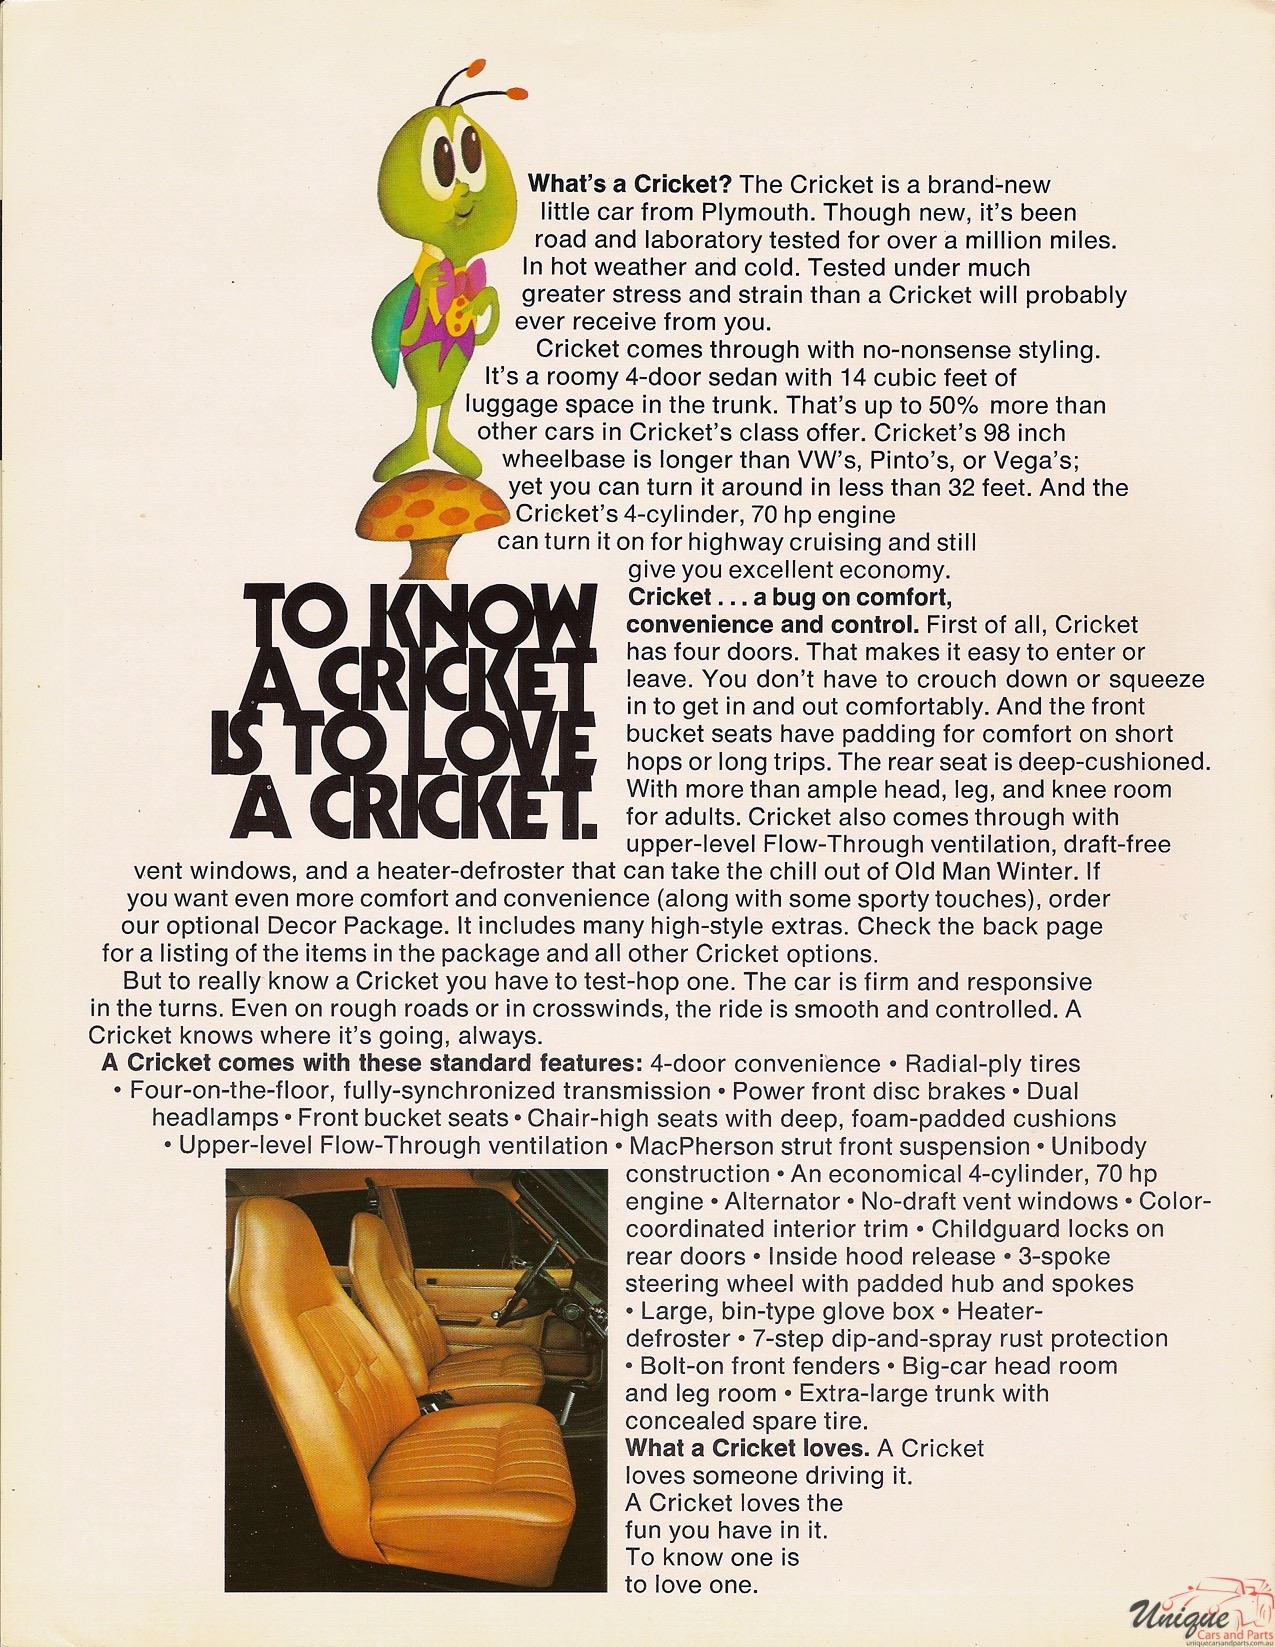 1971 Plymouth Cricket Brochure Page 3